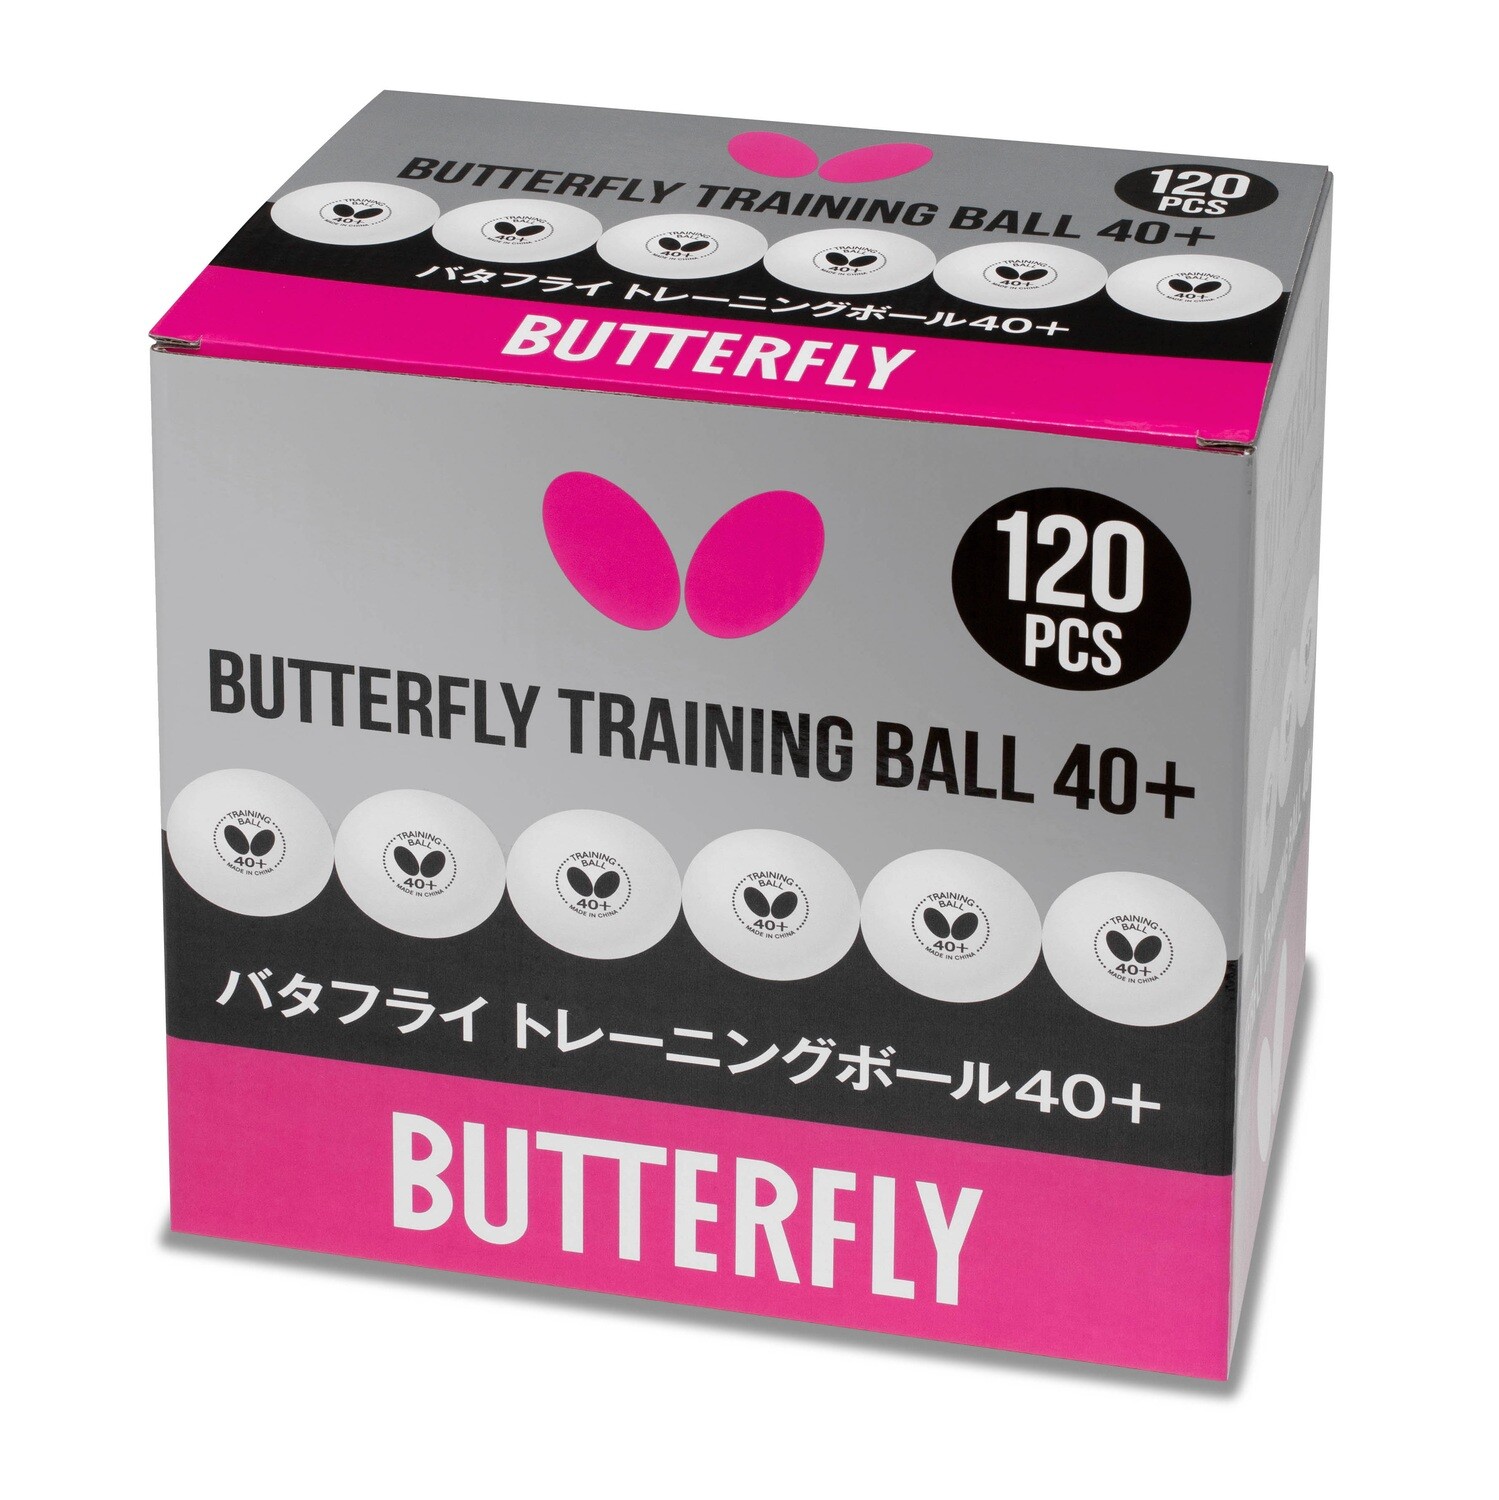 Butterfly Training Table Tennis Ball 40+ Box of 120